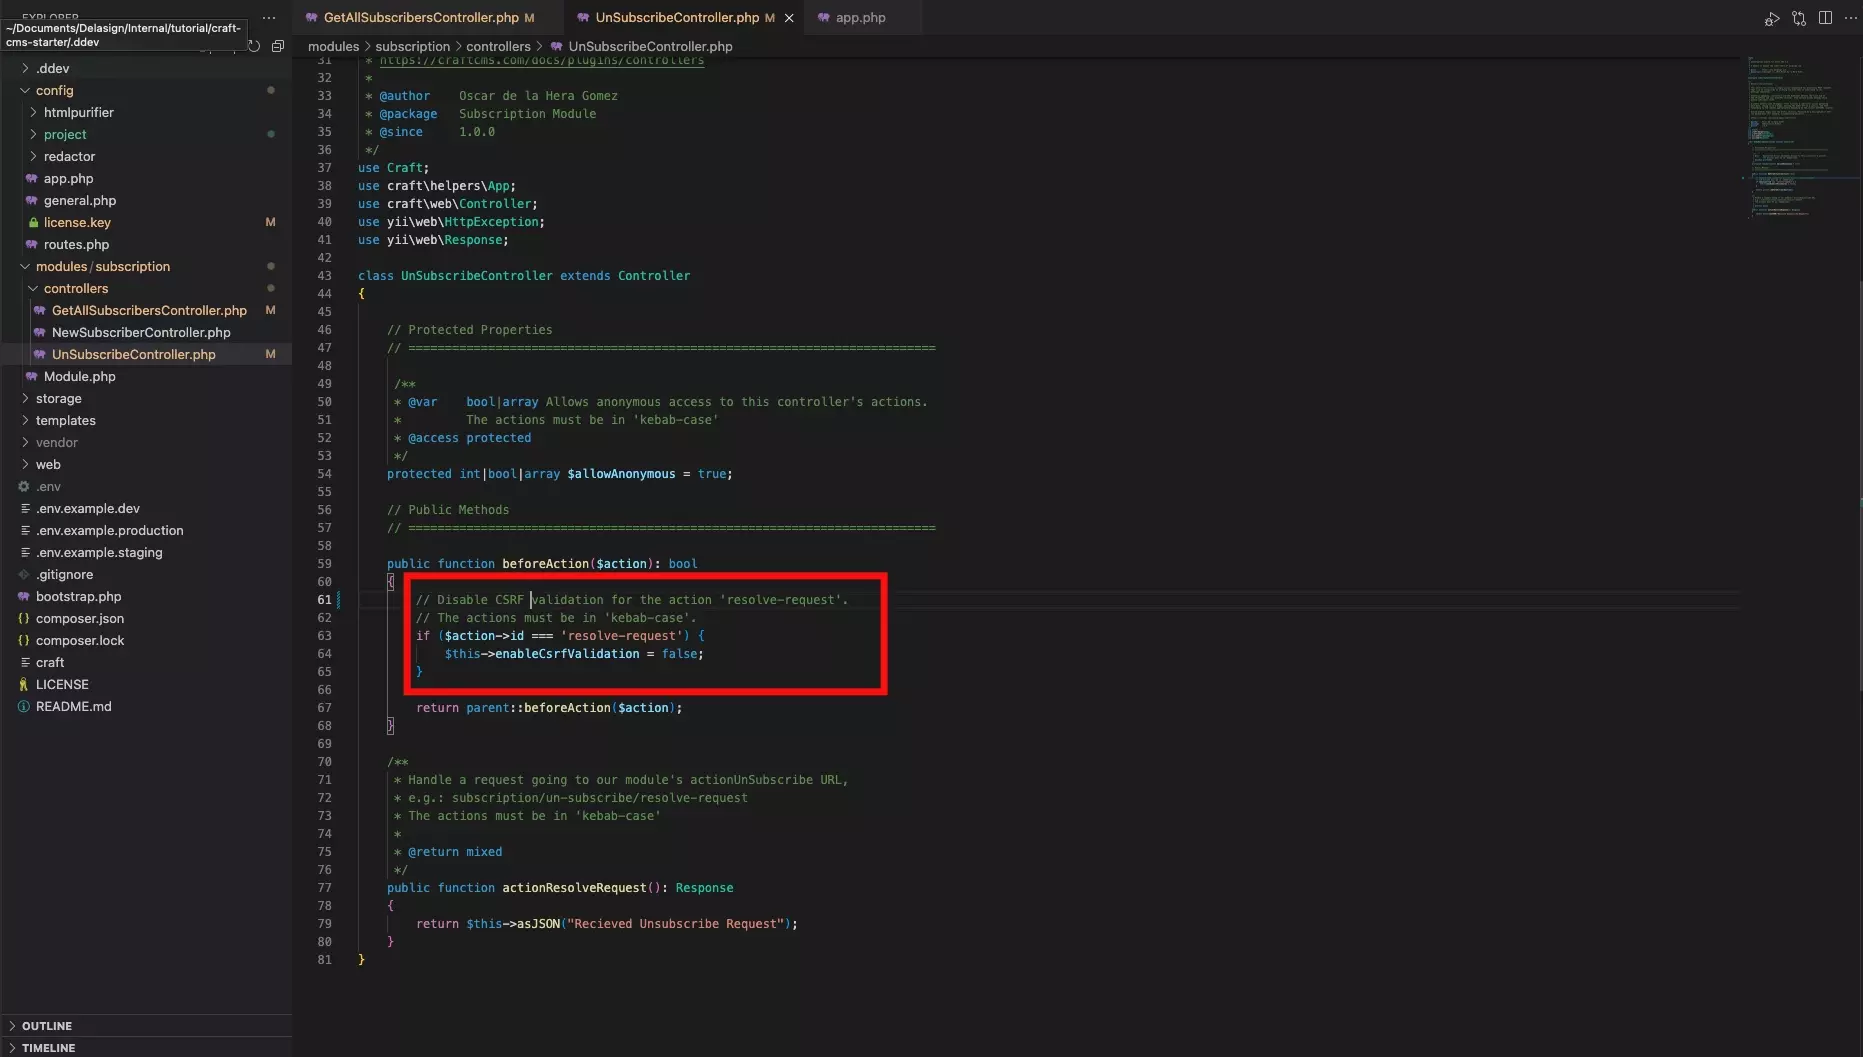 A screenshot showing how to set CSRF validation to false for a specific controller action in Craft CMS. The sample code that is highlighted in this screenshot can be found below.